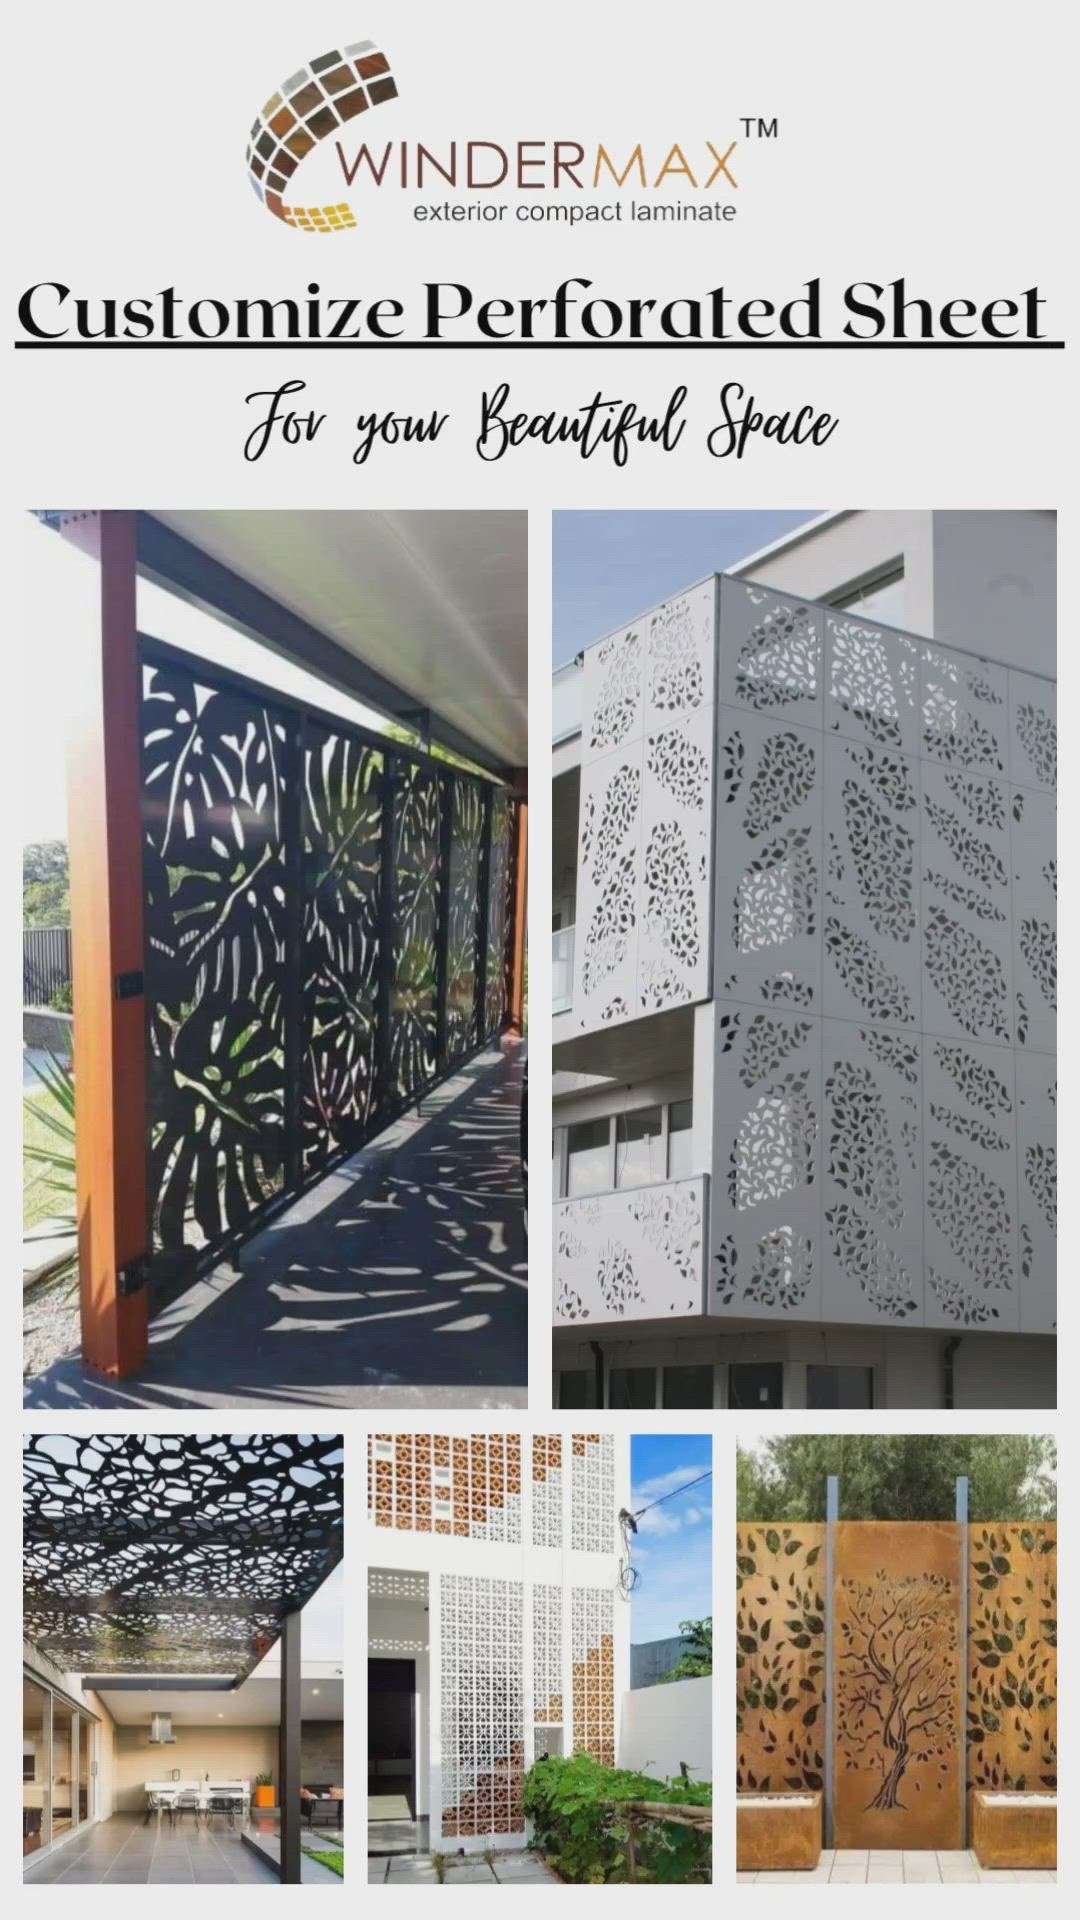 Customize Perforated sheet for your beautiful space 
.
Interior and exterior products available in wholesale prices  

Our Product details 

Metal exterior wall cladding
HPL High pressure laminate
ACL Aluminum composite louvers 
Solid aluminium louvers
WPC louvers
Wall FINs 
ACP Aluminium composite panel
ACP/HPL Colour rivets
Shed fabrication 
.
.
#cnc #homeelevation #manufacturing #building #engineering #homedecor #architect #sheet #cncmachine #design #interior #exterior #fabrication #cncrouter #perforatedsheet #cncmachinist #tools #metalworking #cncmill #metal #lasercutting #welding #machine #laser #cncwoodworking #elevation

For more details our all products please visit websites
www.windermaxindia.com
www.indianmake.co.in 
or call us on 
8882291670 9810980278

Regards
Windermax India
Regards
Windermax India